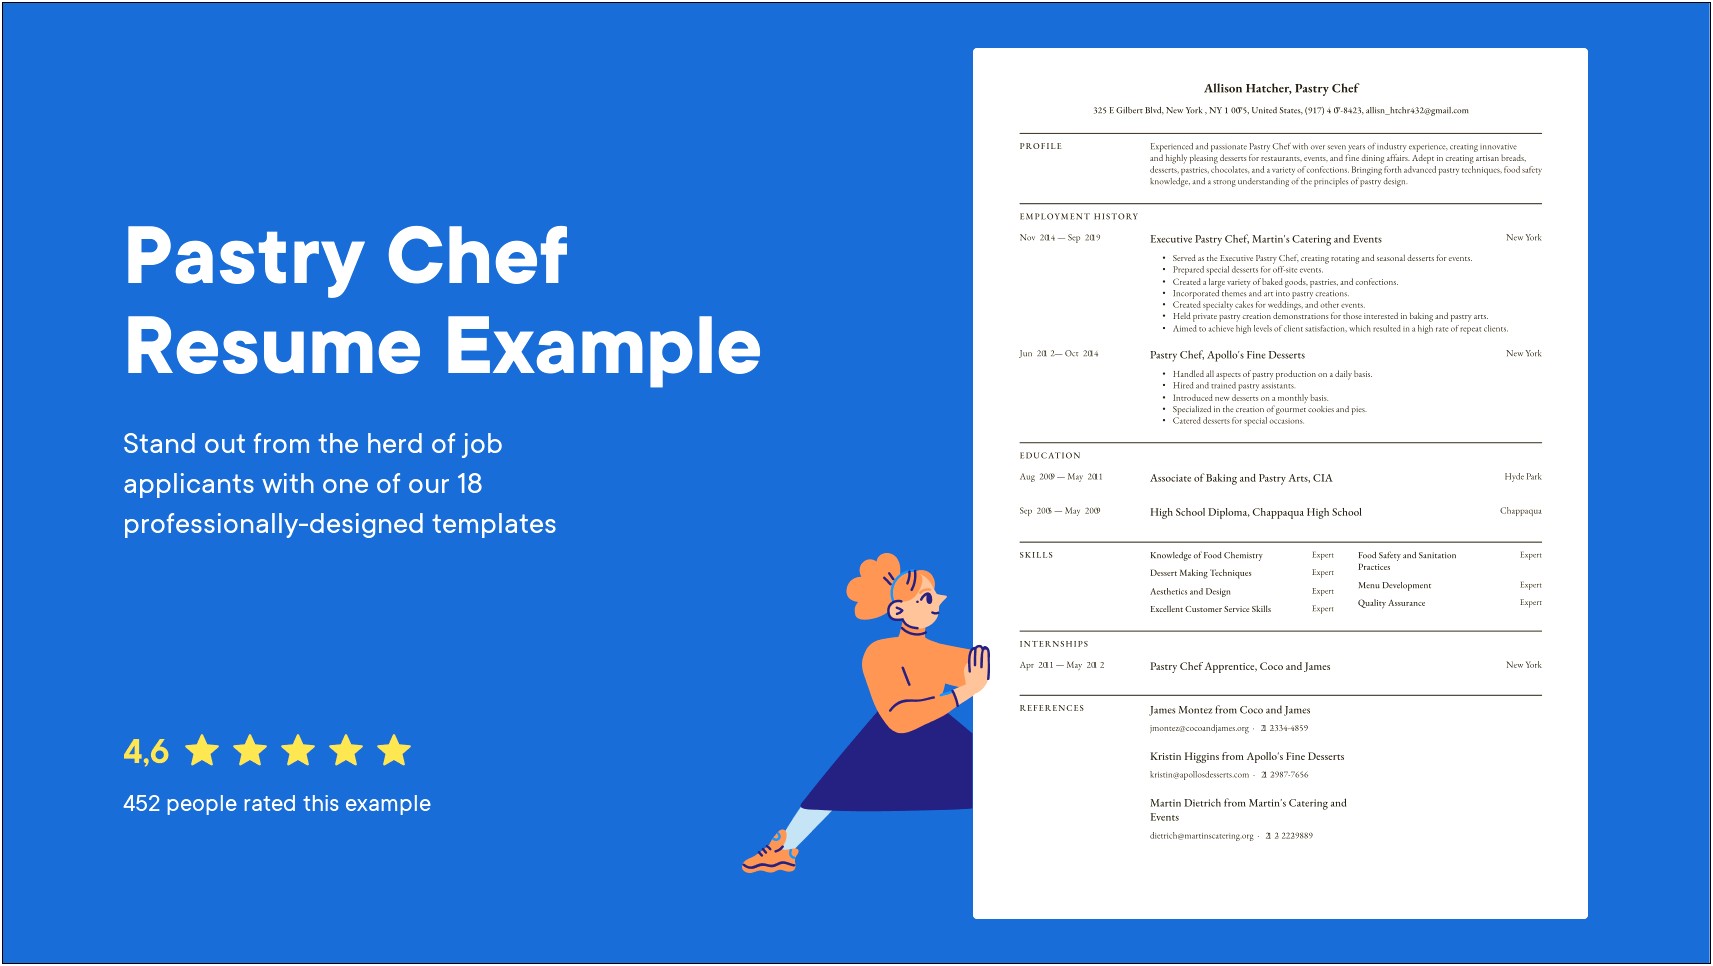 Resume Objective Private Chef Example